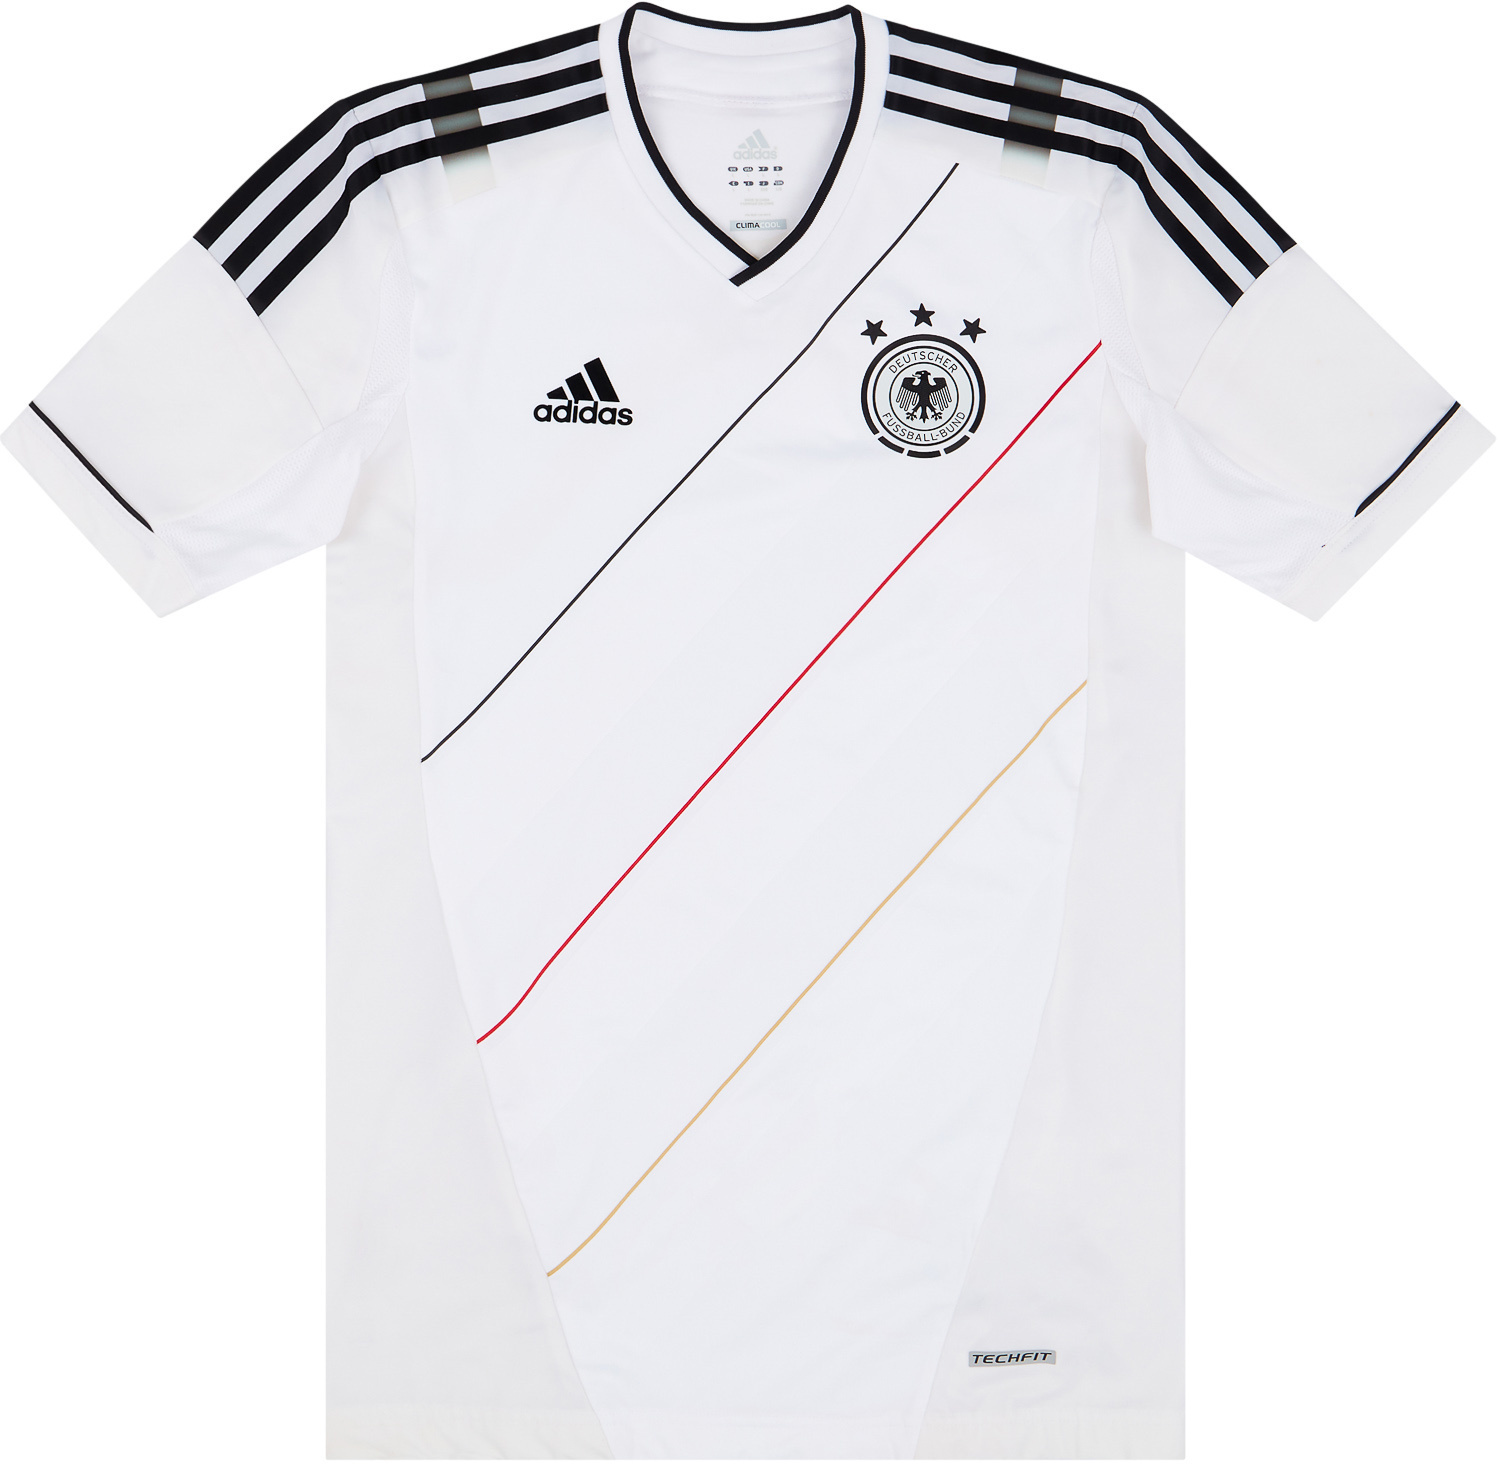 2012-13 Germany Player Issue Techfit Home Shirt - 5/10 - ()